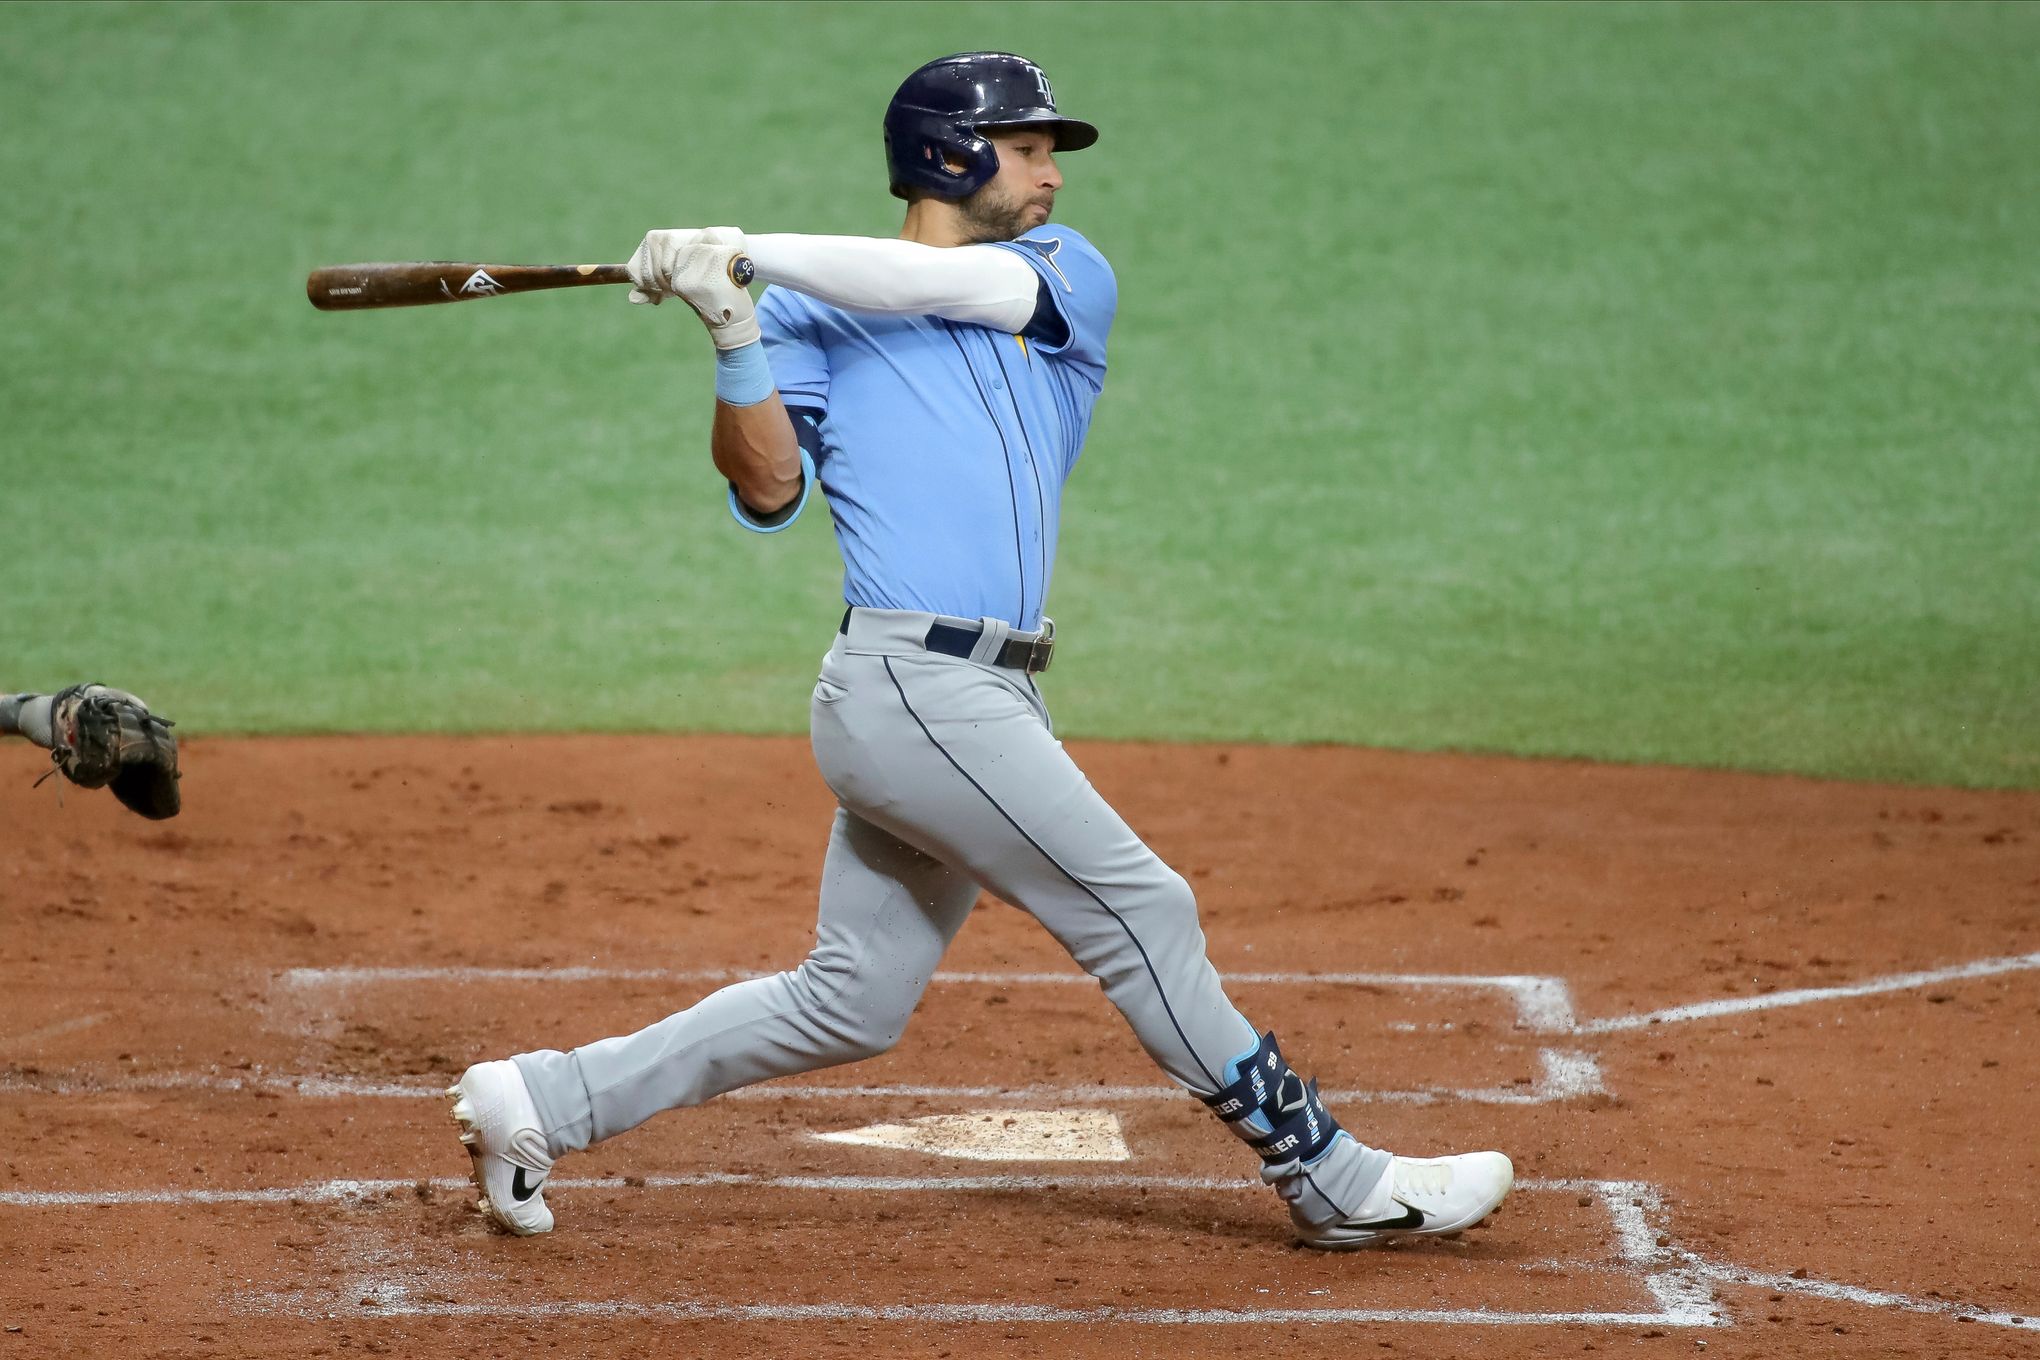 Rays History: Yoshimoto Tsutsugo will not be the first Japanese